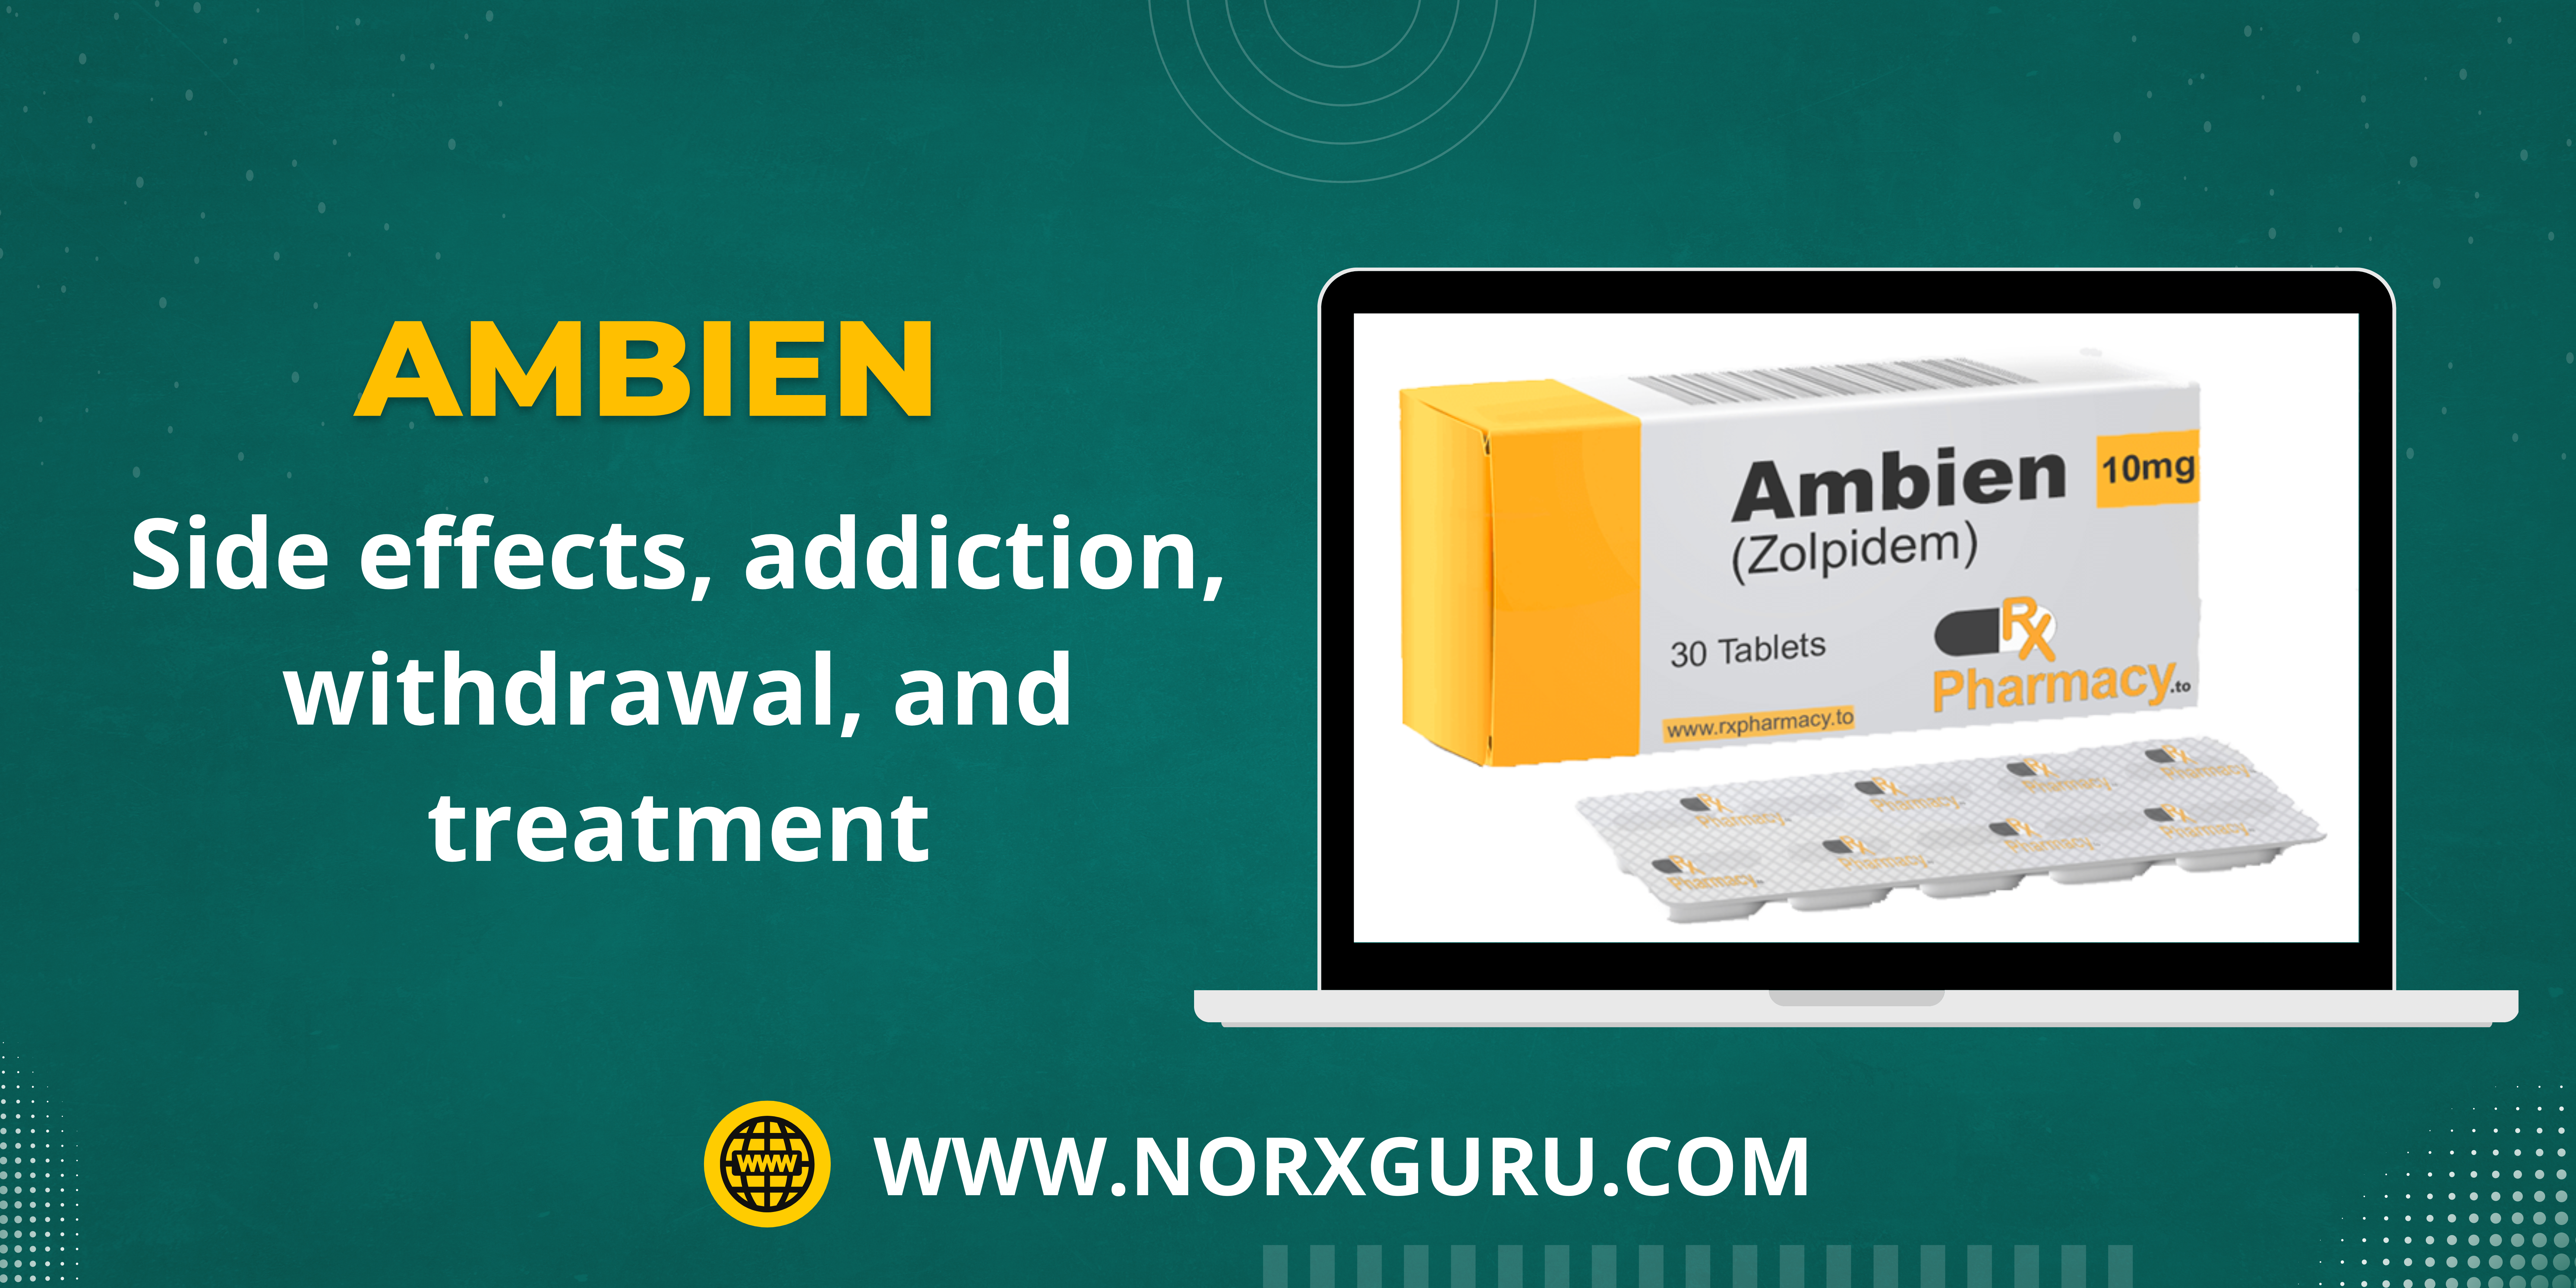 Ambien: Side effects, addiction, withdrawal, and treatment